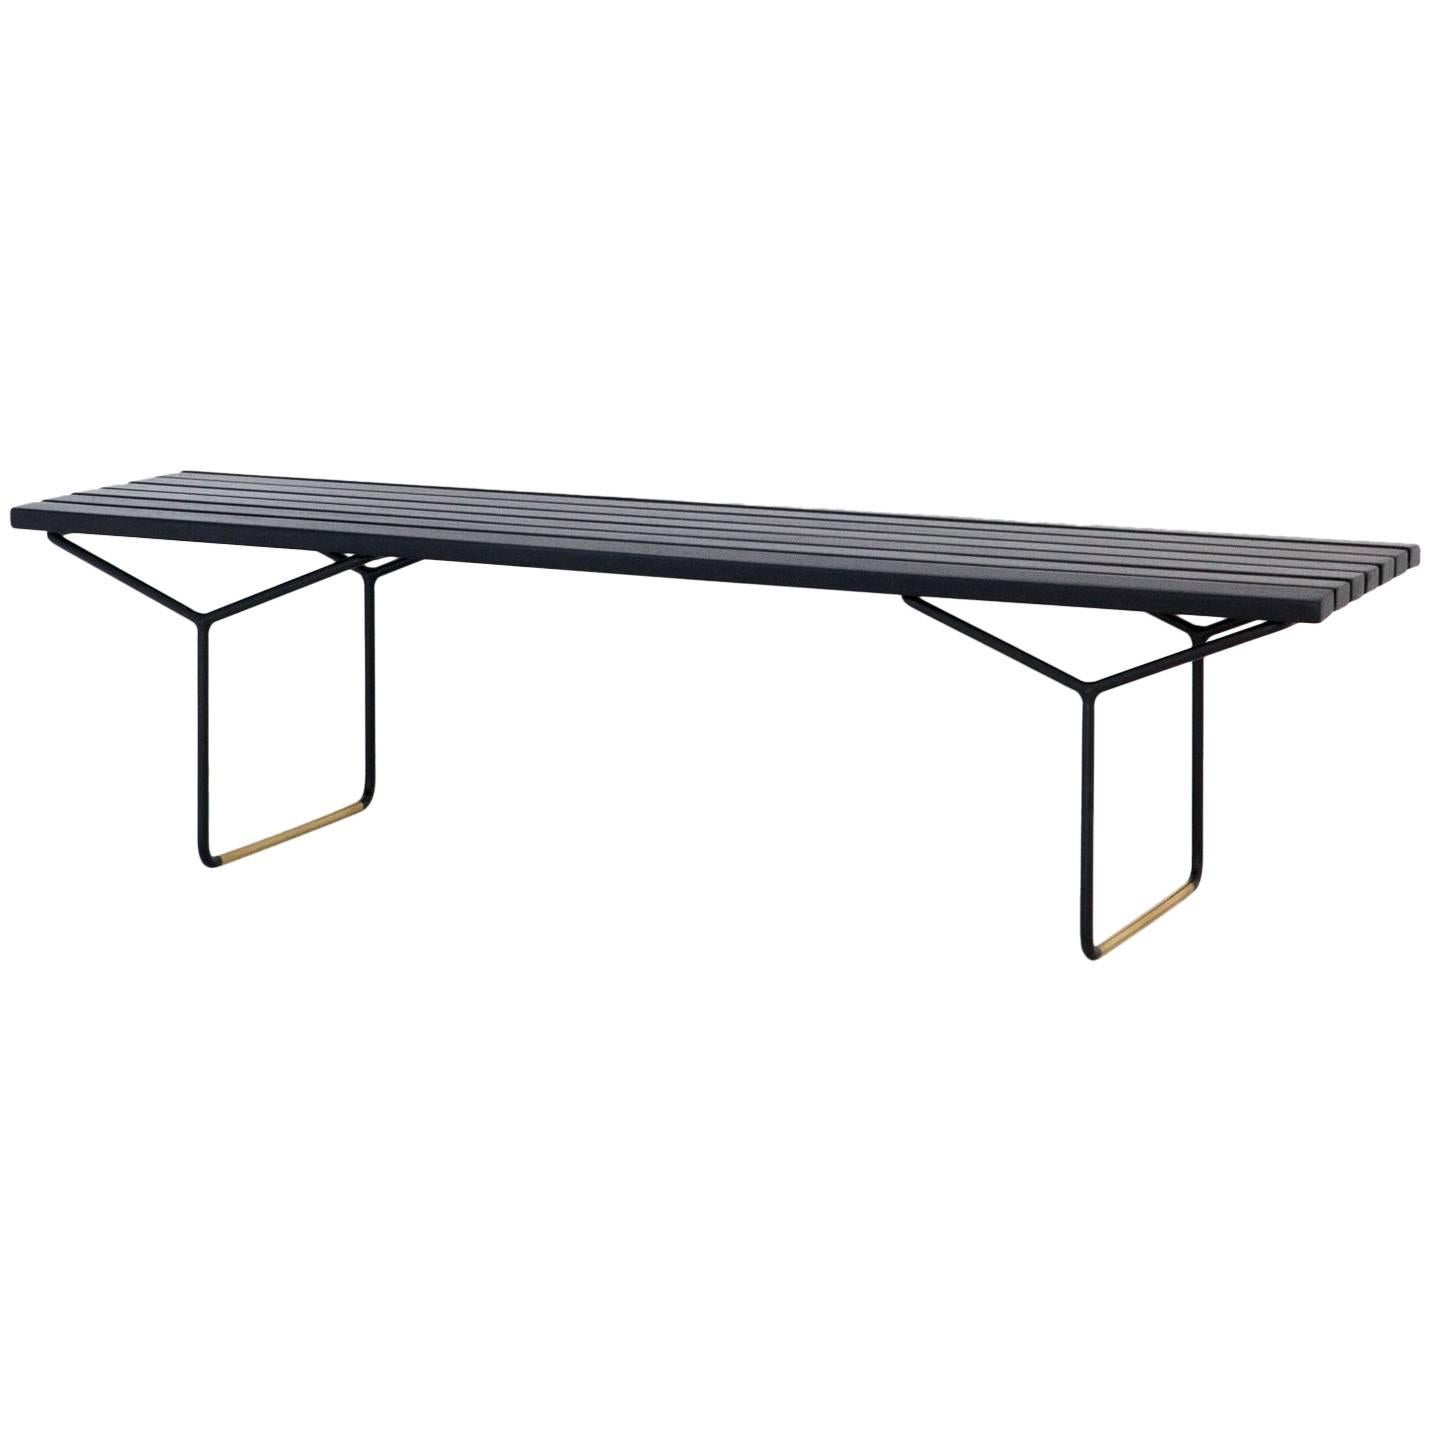 Italian Mid-Century Modern Iron Brass and Black Wood Bench by Pizzetti and Knoll